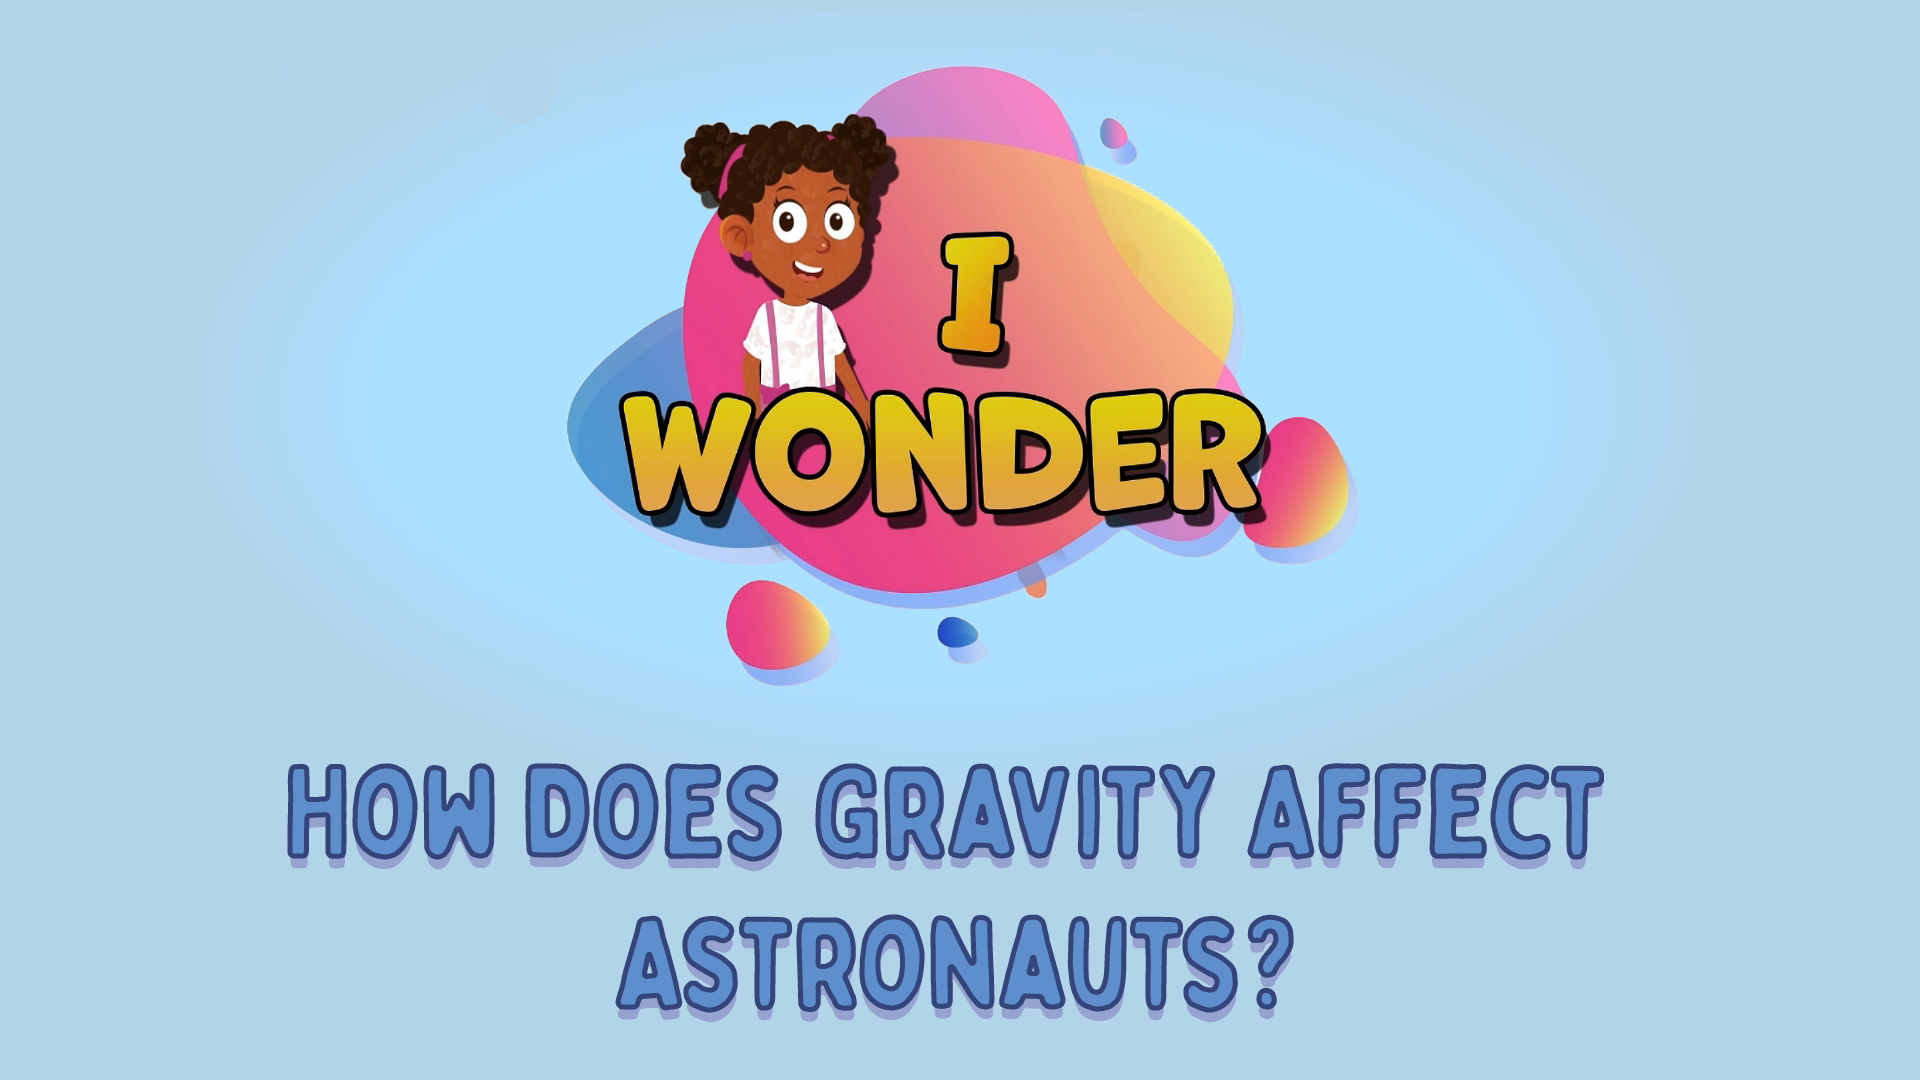 How Does Gravity Affect Astronauts?